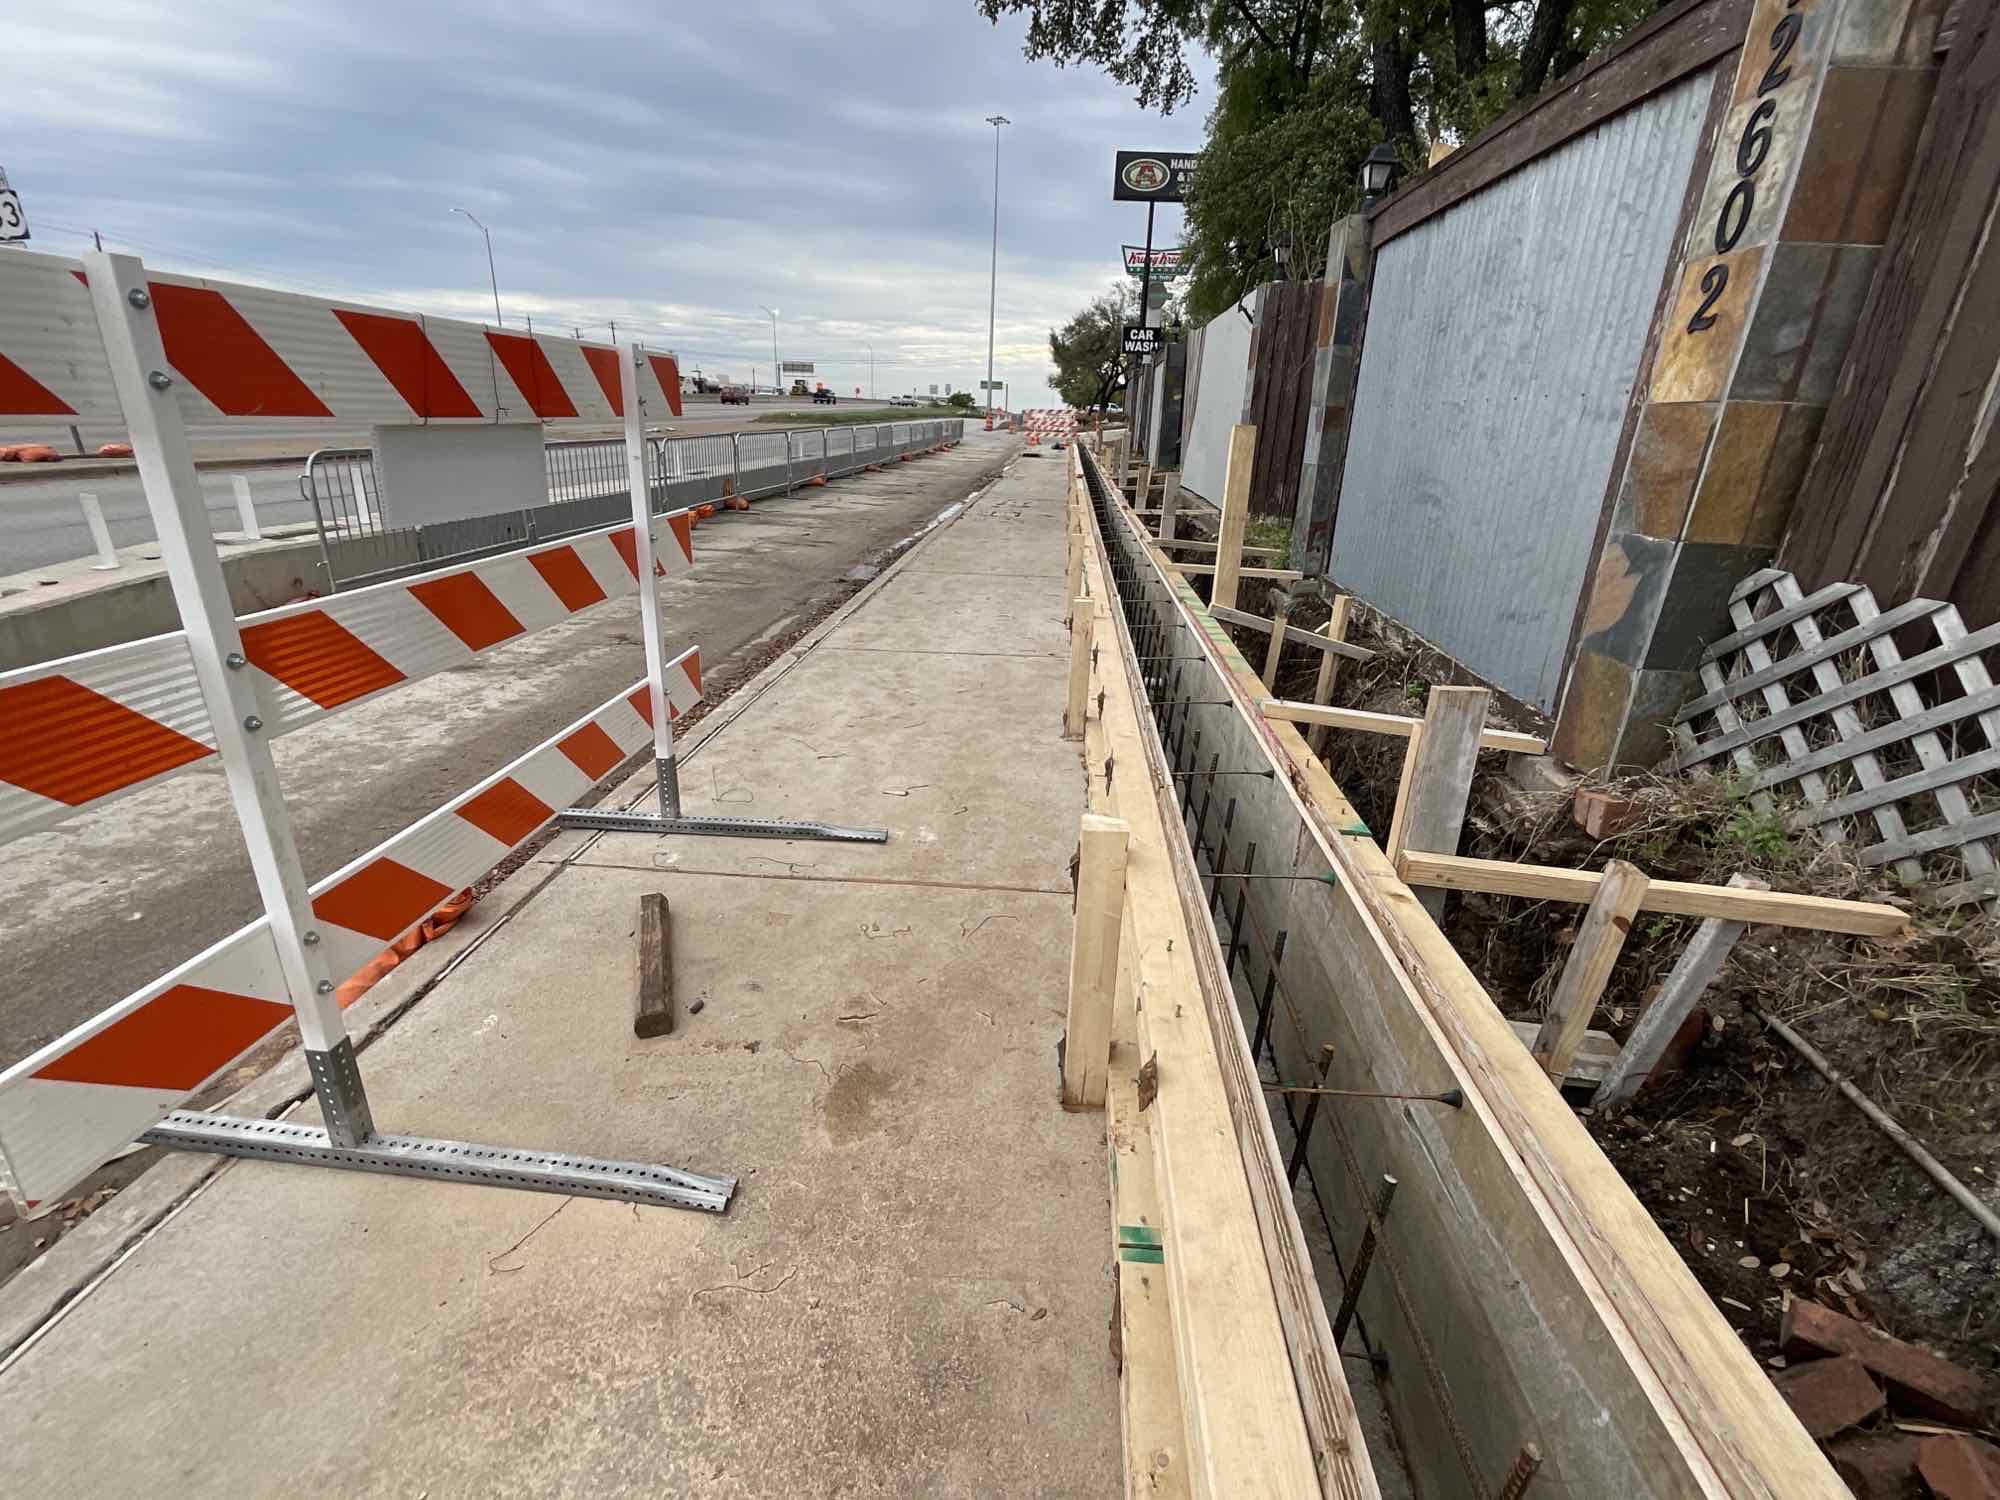 Completed sidewalk - Sidewalk wall being constructed on the 183 Southbound frontage road